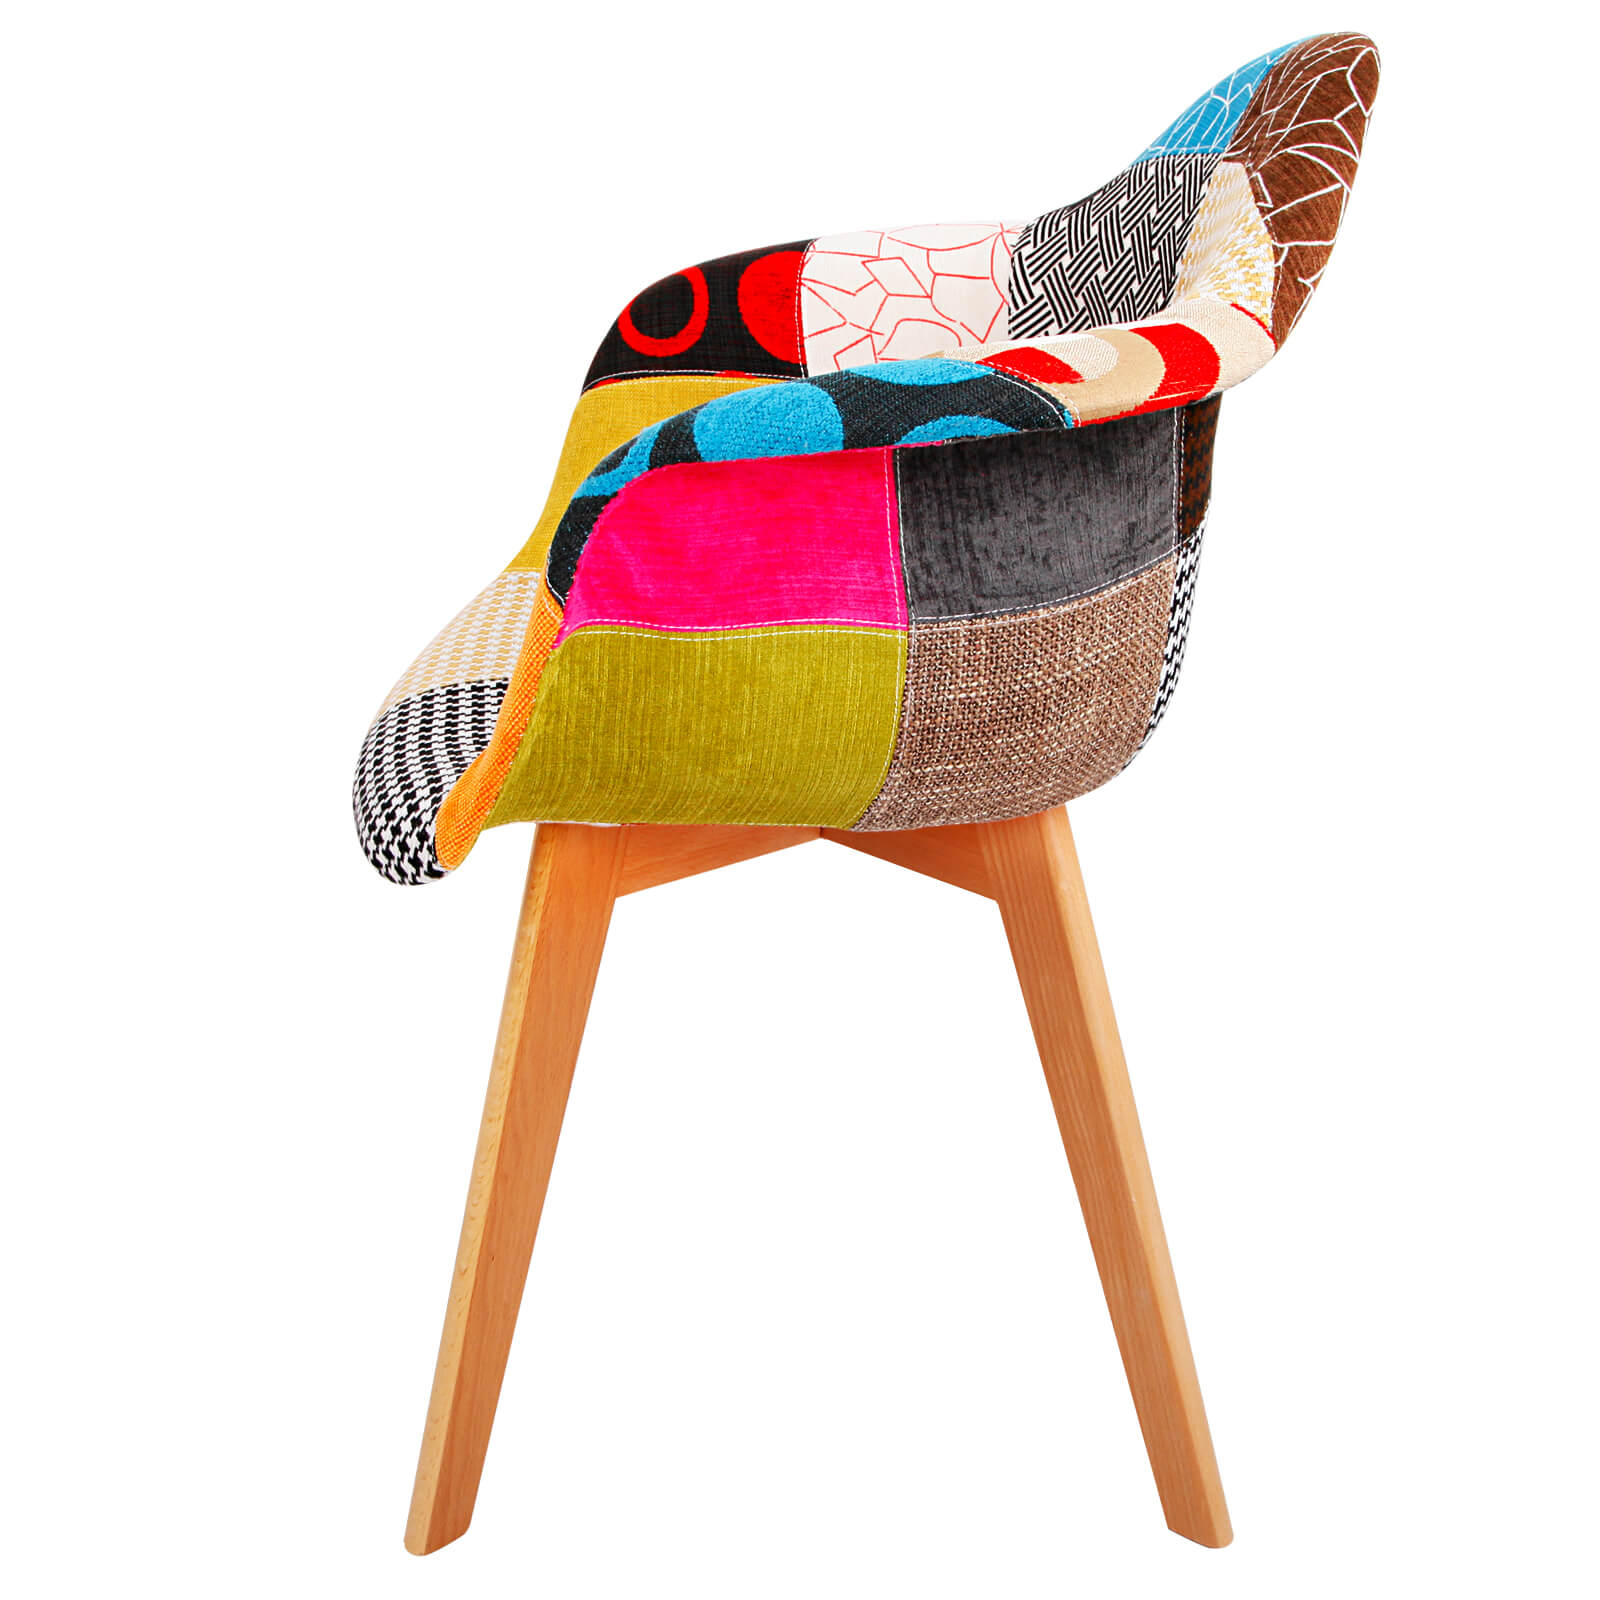 Marlo Version 2 | Multi Coloured, Upholstered, Wooden Dining Chairs | Set Of 2 | Multi - Coloured